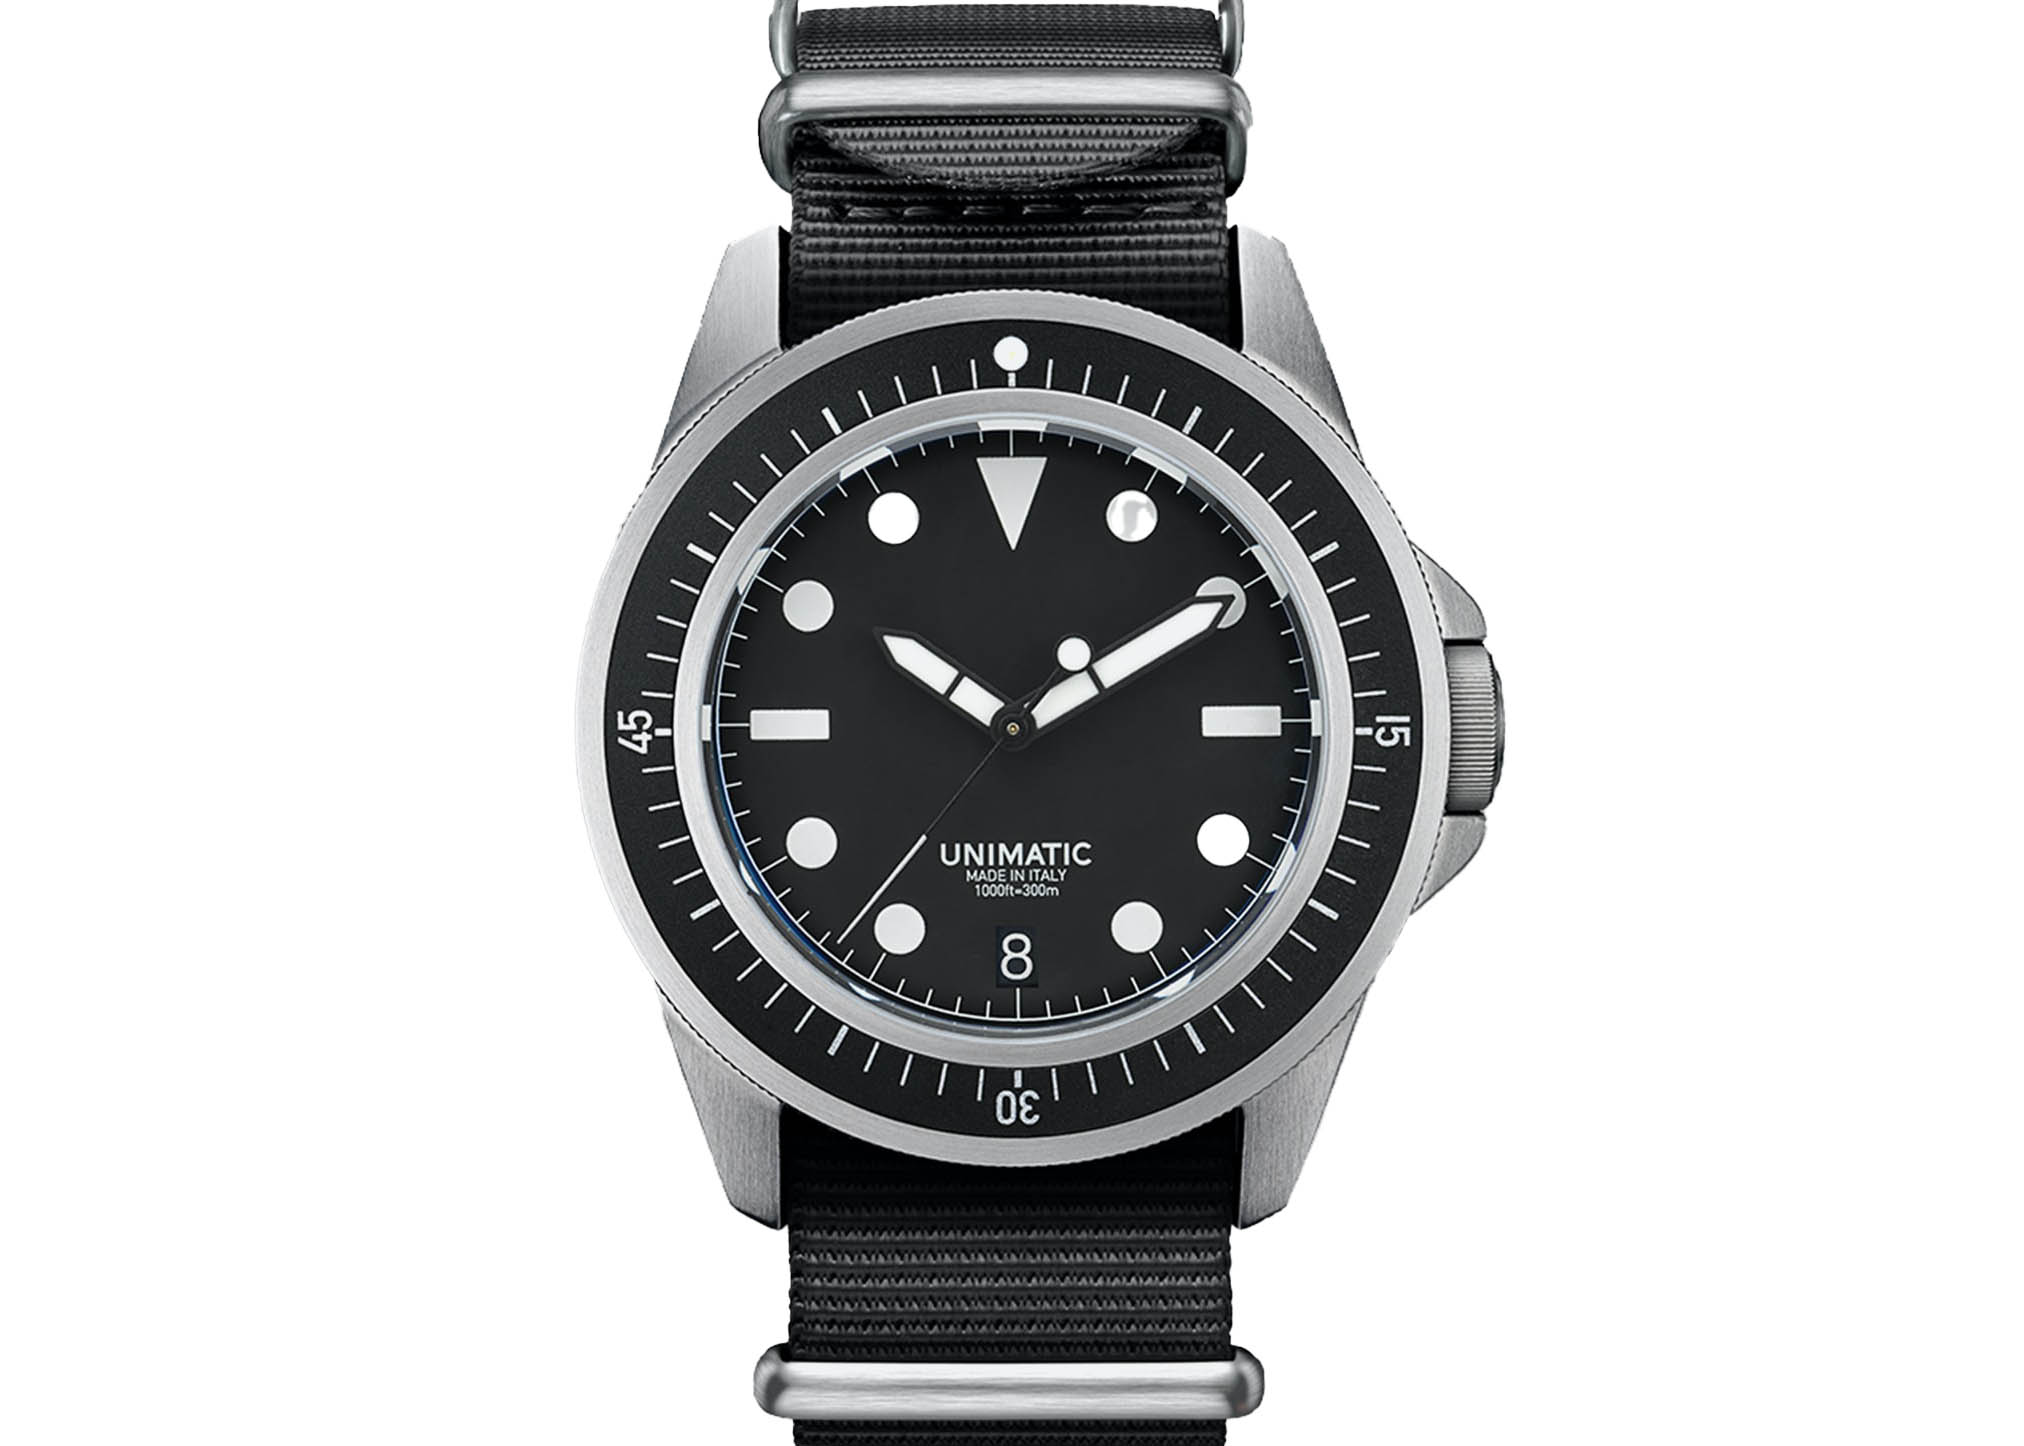 UNIMATIC and HODINKEE Collaborate For Tool Watch Collection